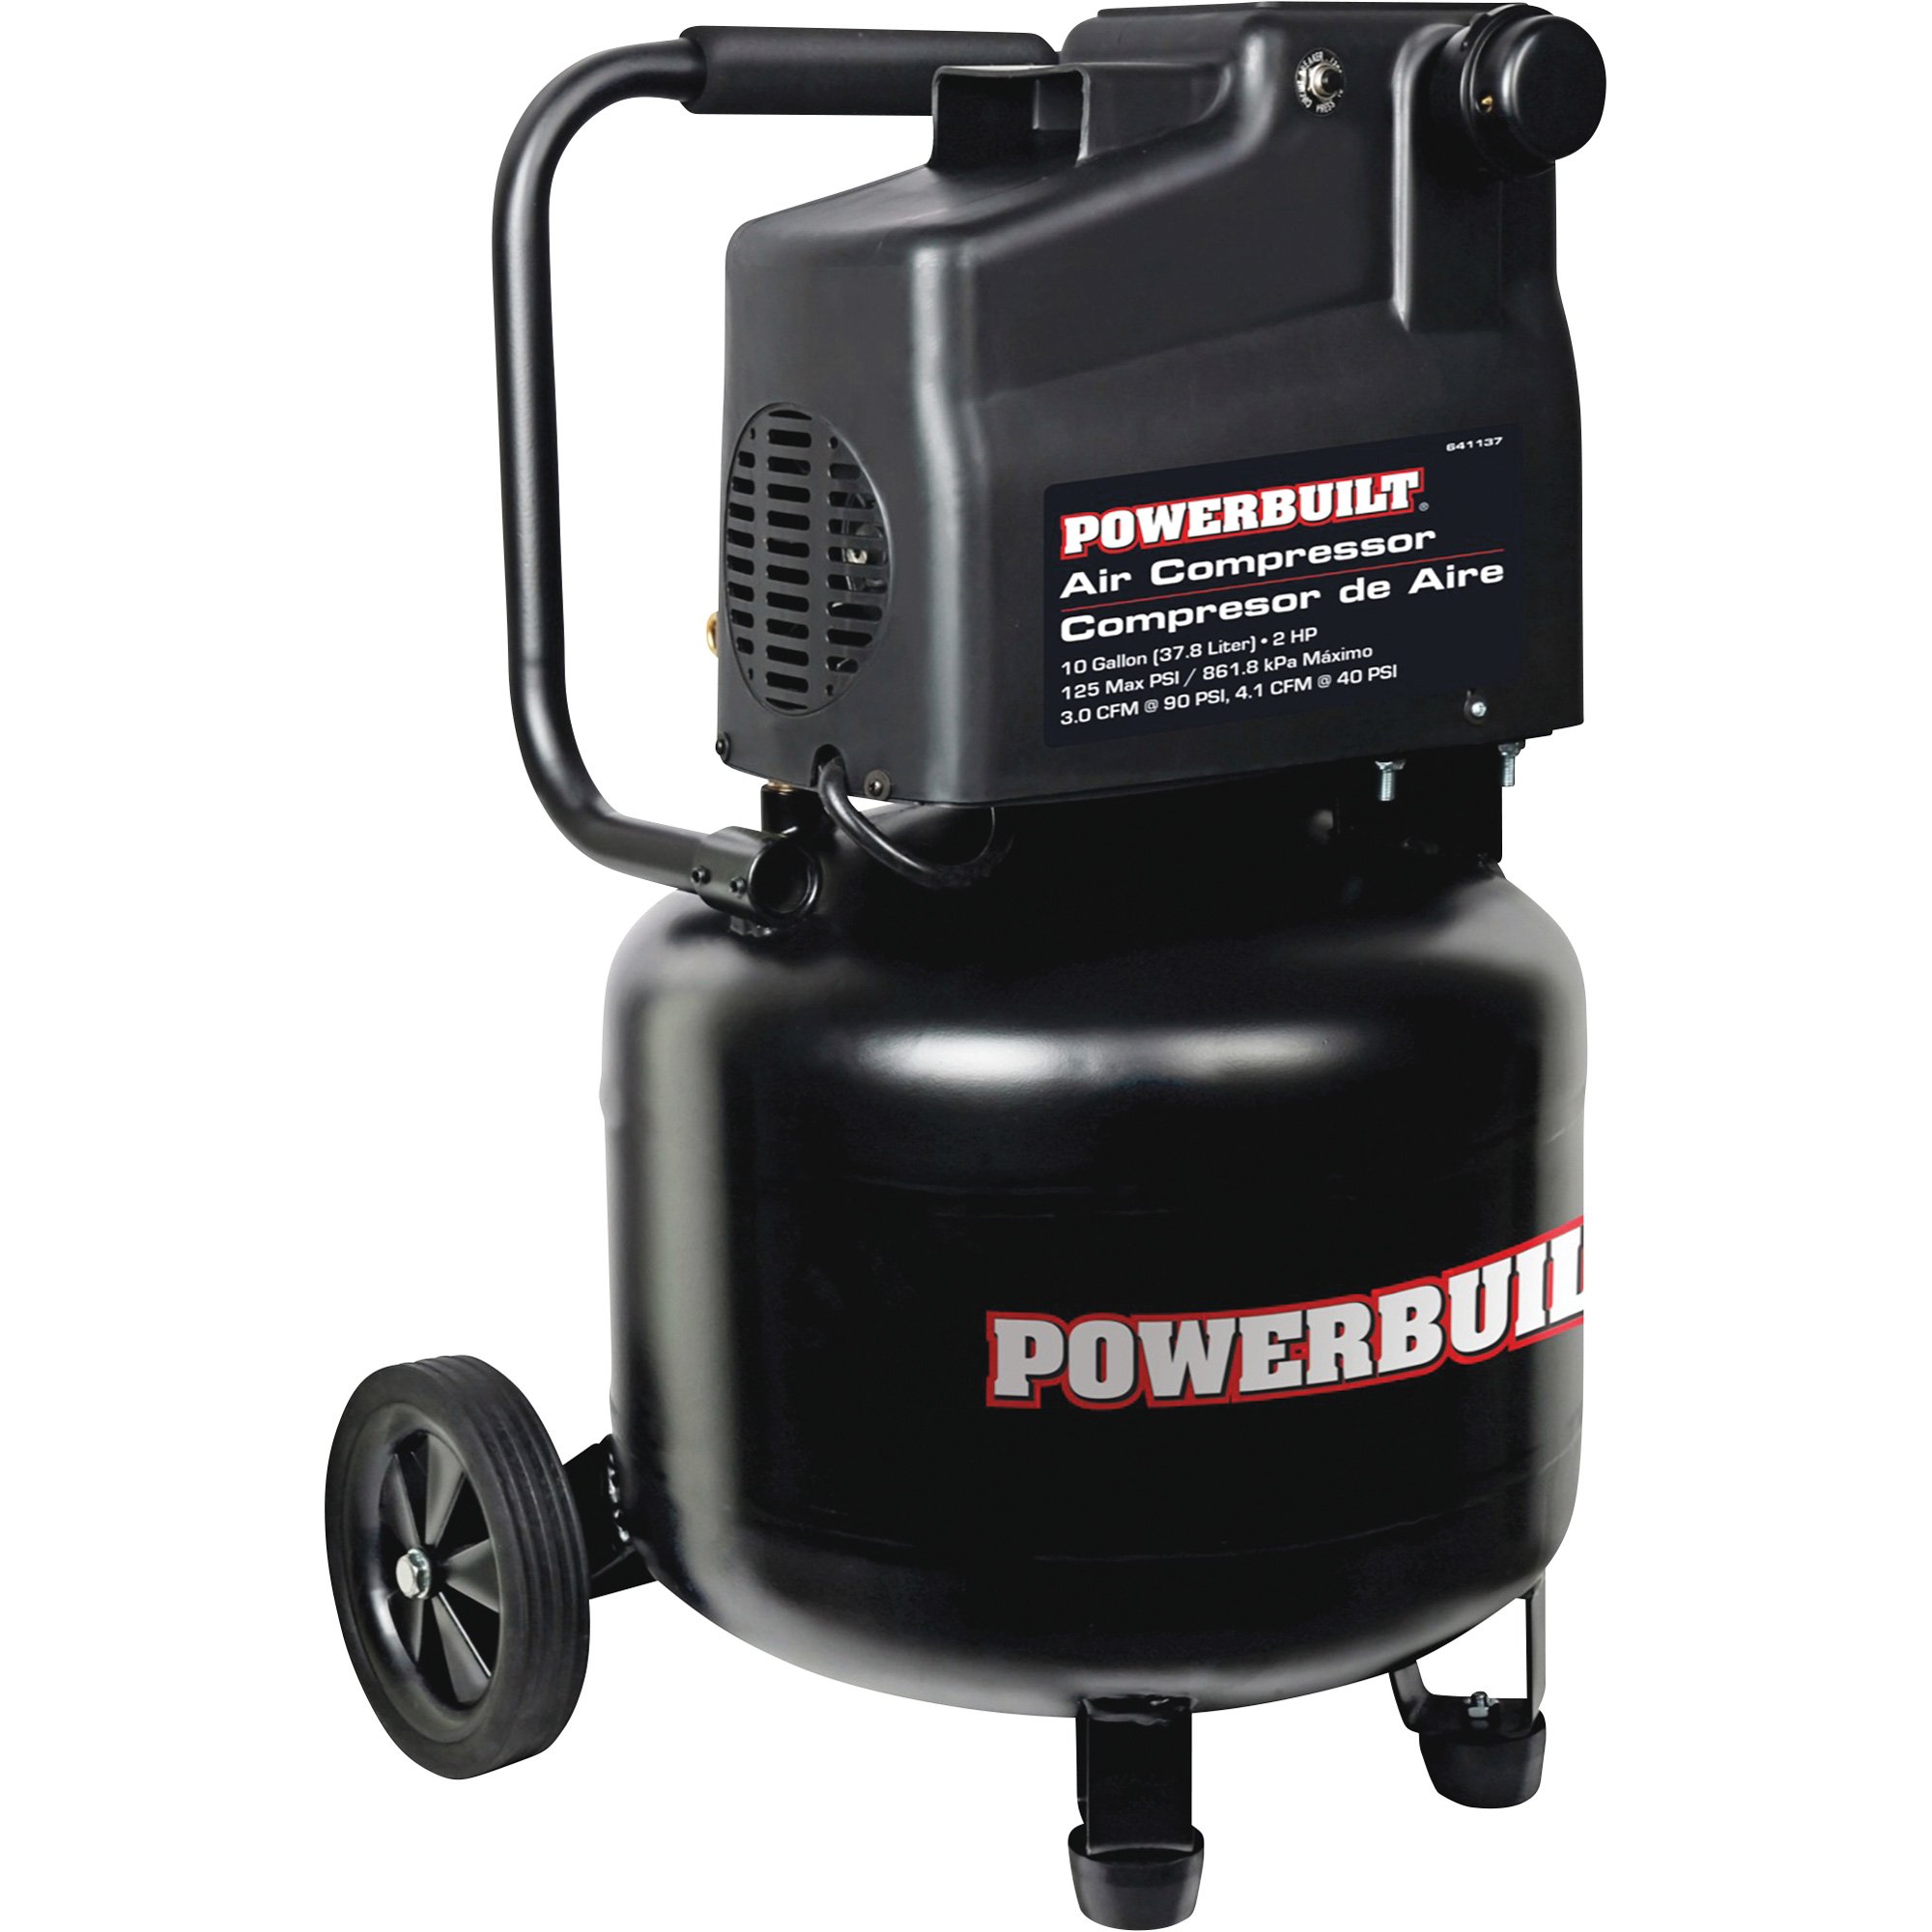 JobSmart 2 HP 10 gal. Single Stage Horizontal Portable Air Compressor at  Tractor Supply Co.